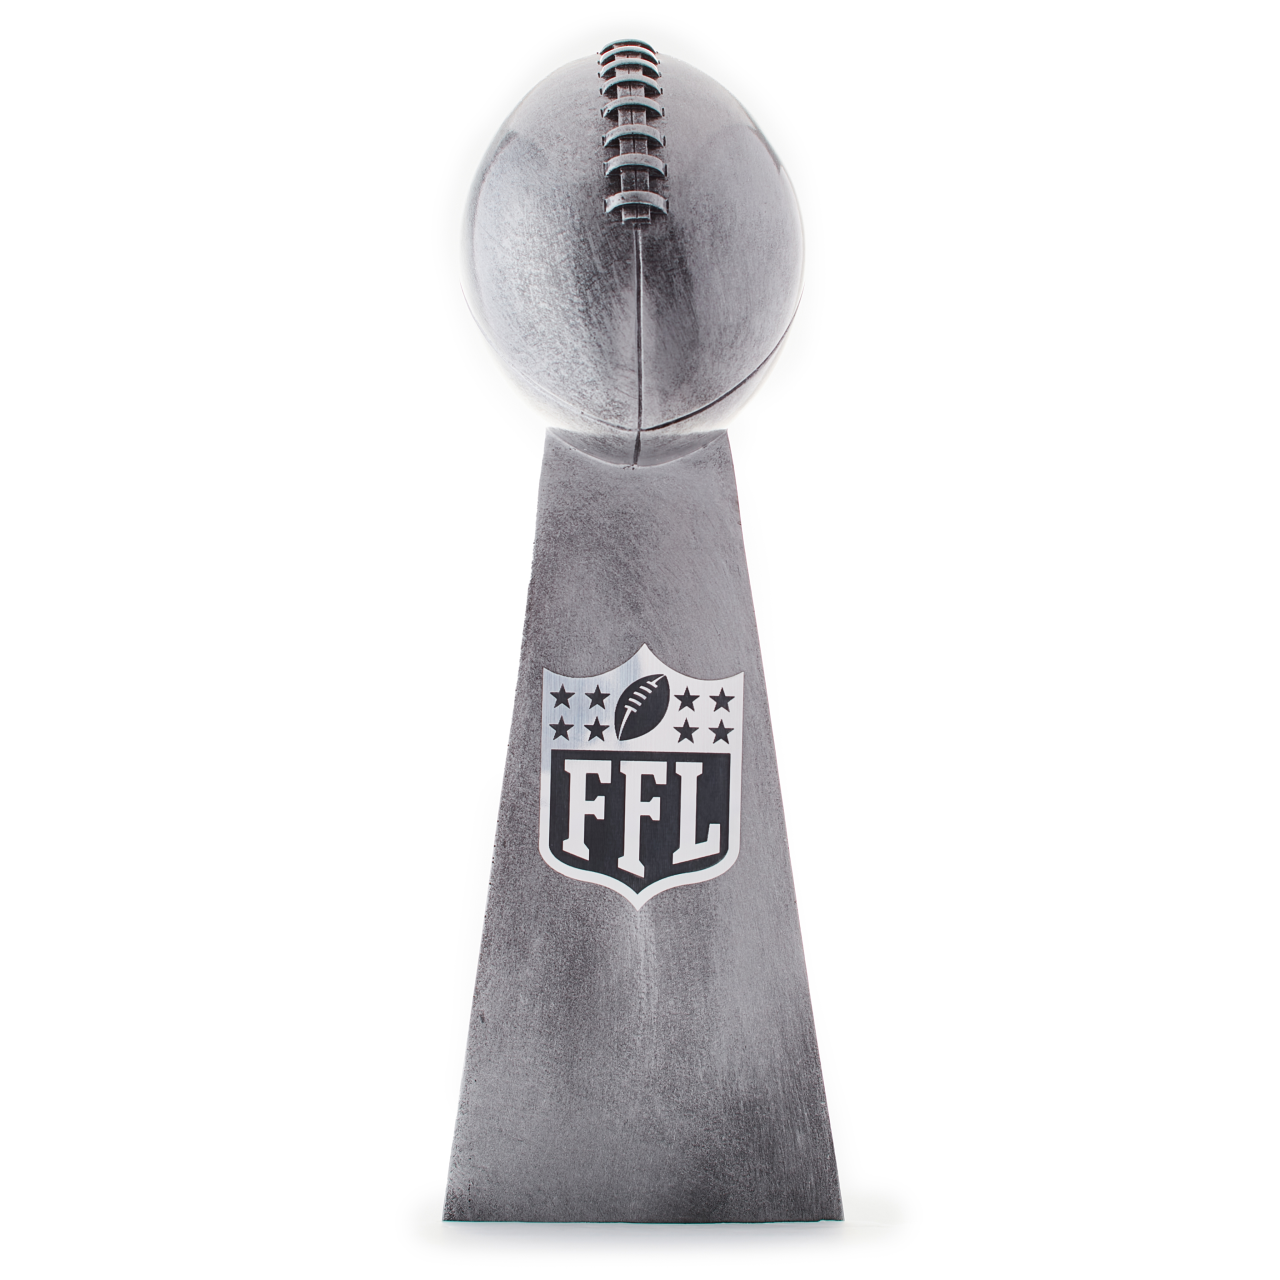 Fantasy Football Trophy with Realistic Design | Silver Championship Replica | First Place Award for League or Team Champions | Available in 2 Sizes